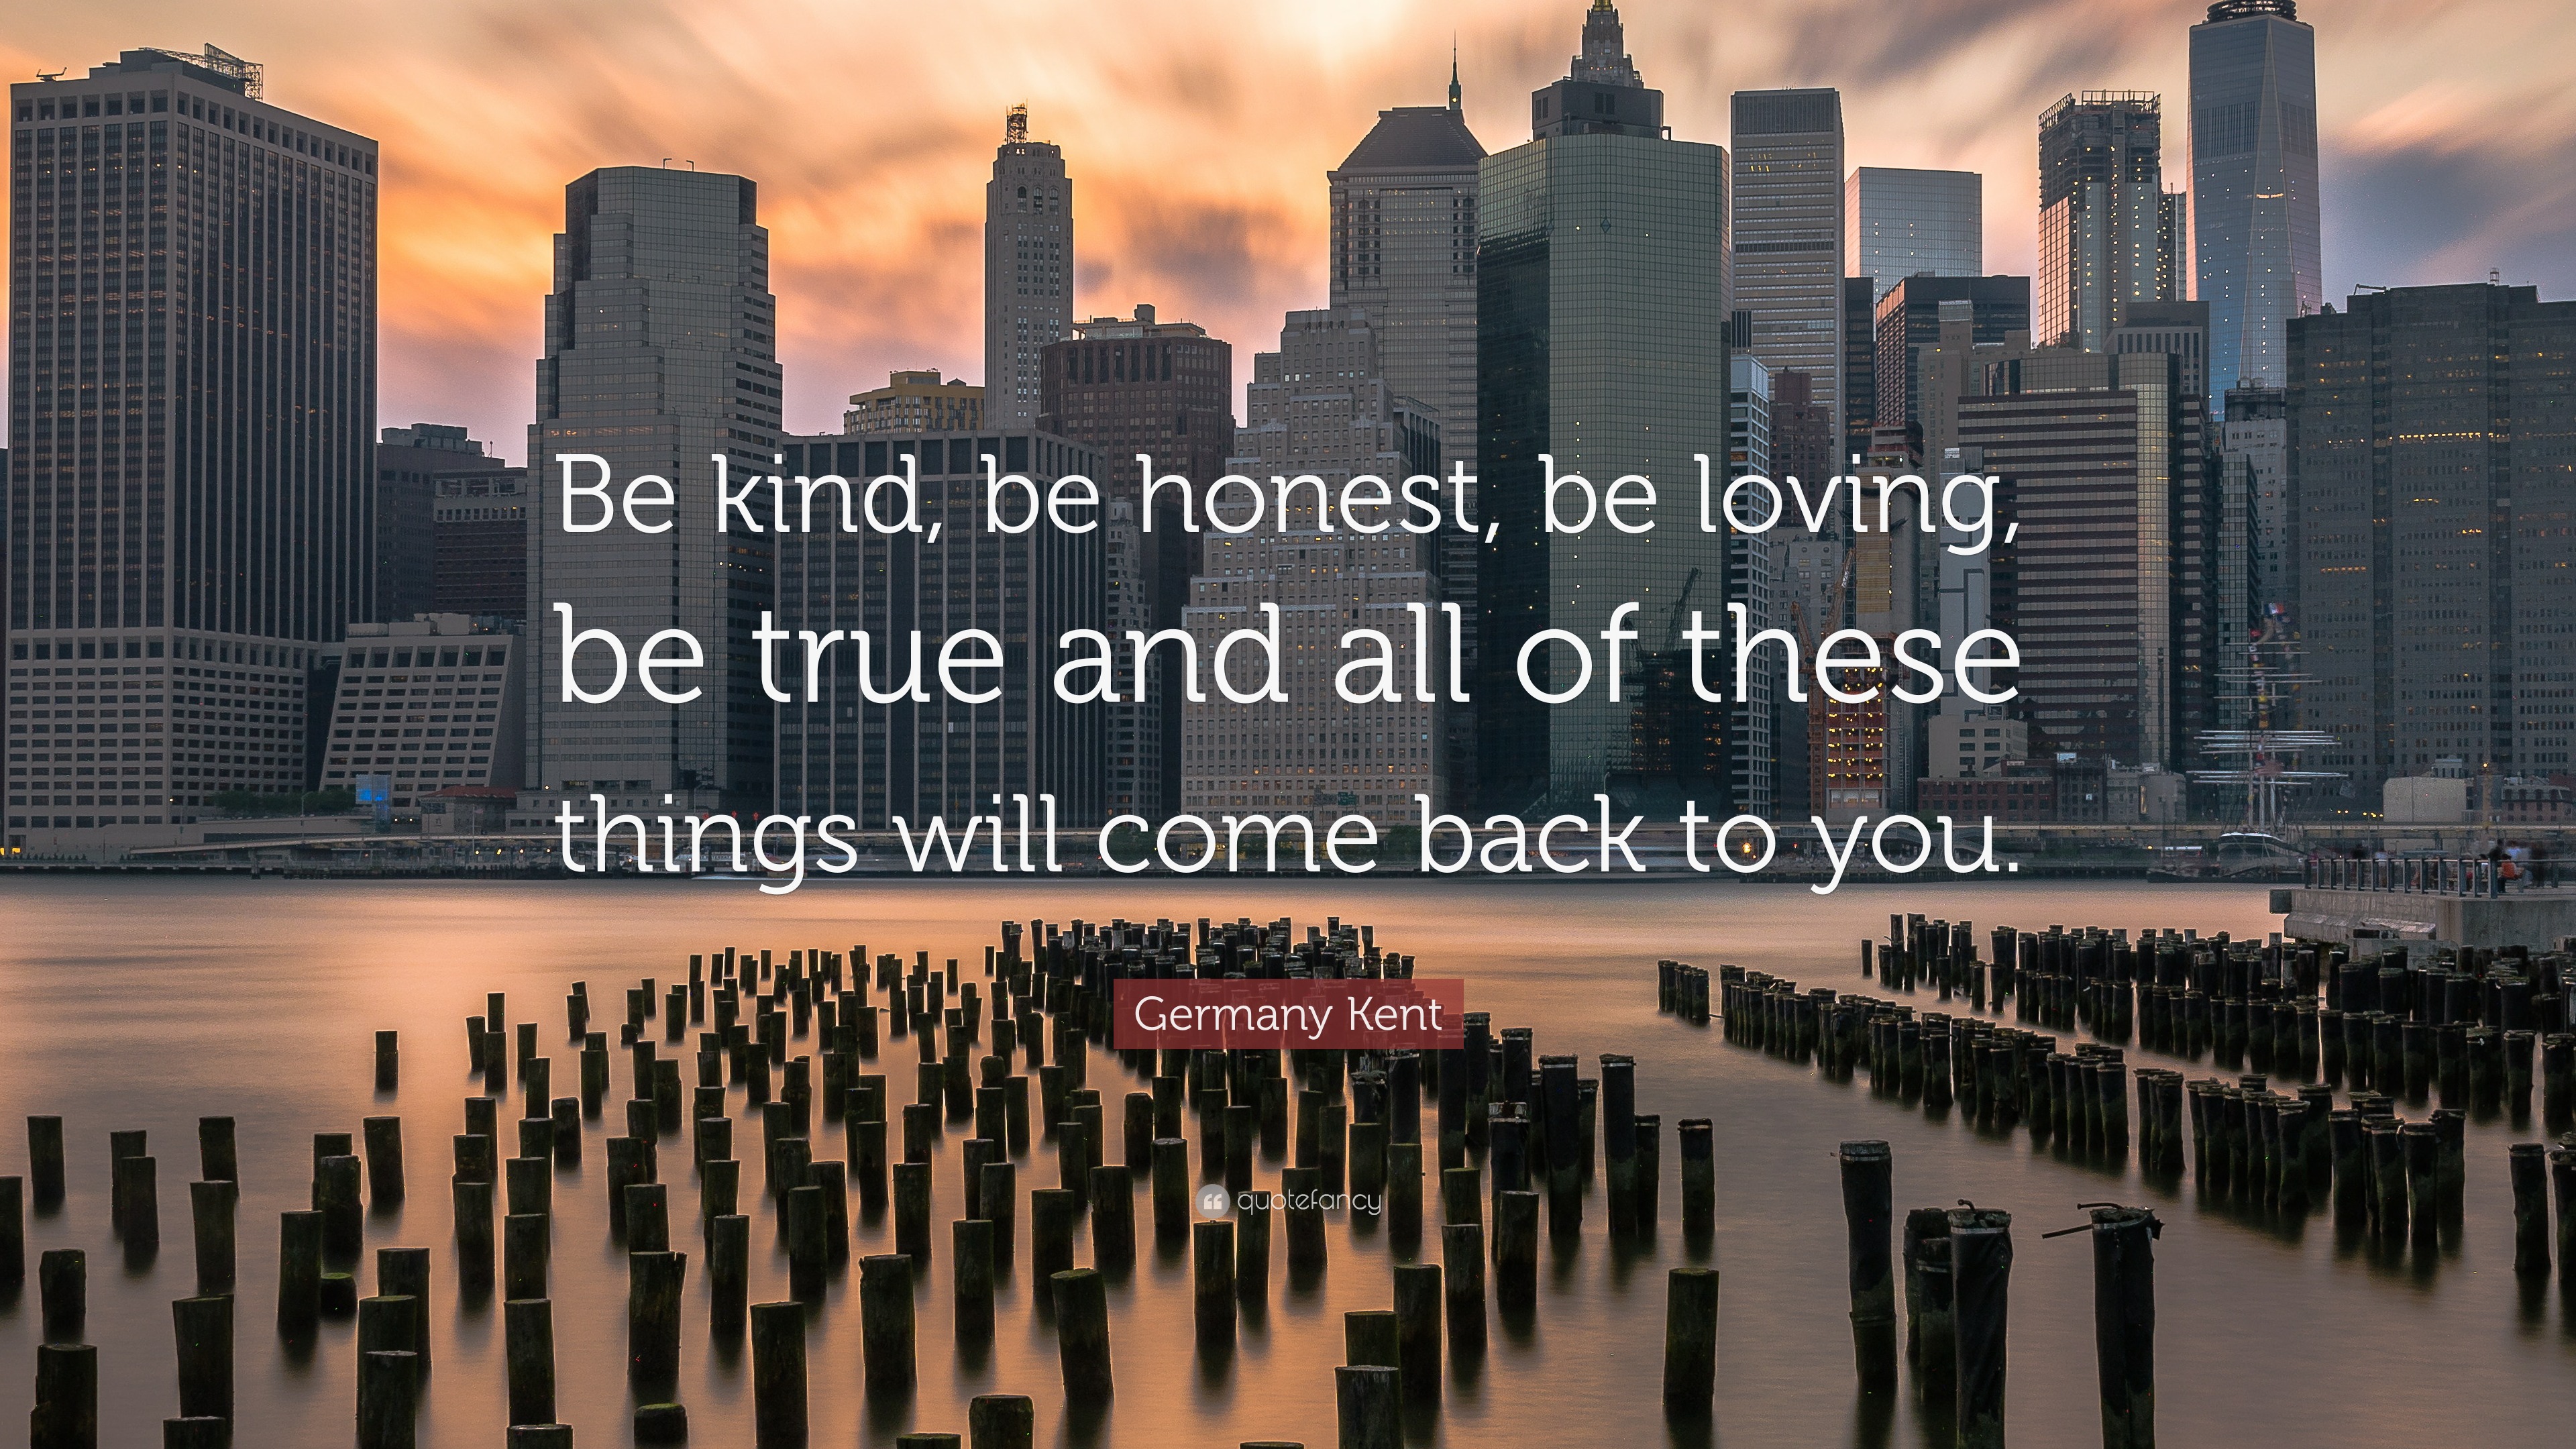 https://quotefancy.com/media/wallpaper/3840x2160/7644787-Germany-Kent-Quote-Be-kind-be-honest-be-loving-be-true-and-all-of.jpg